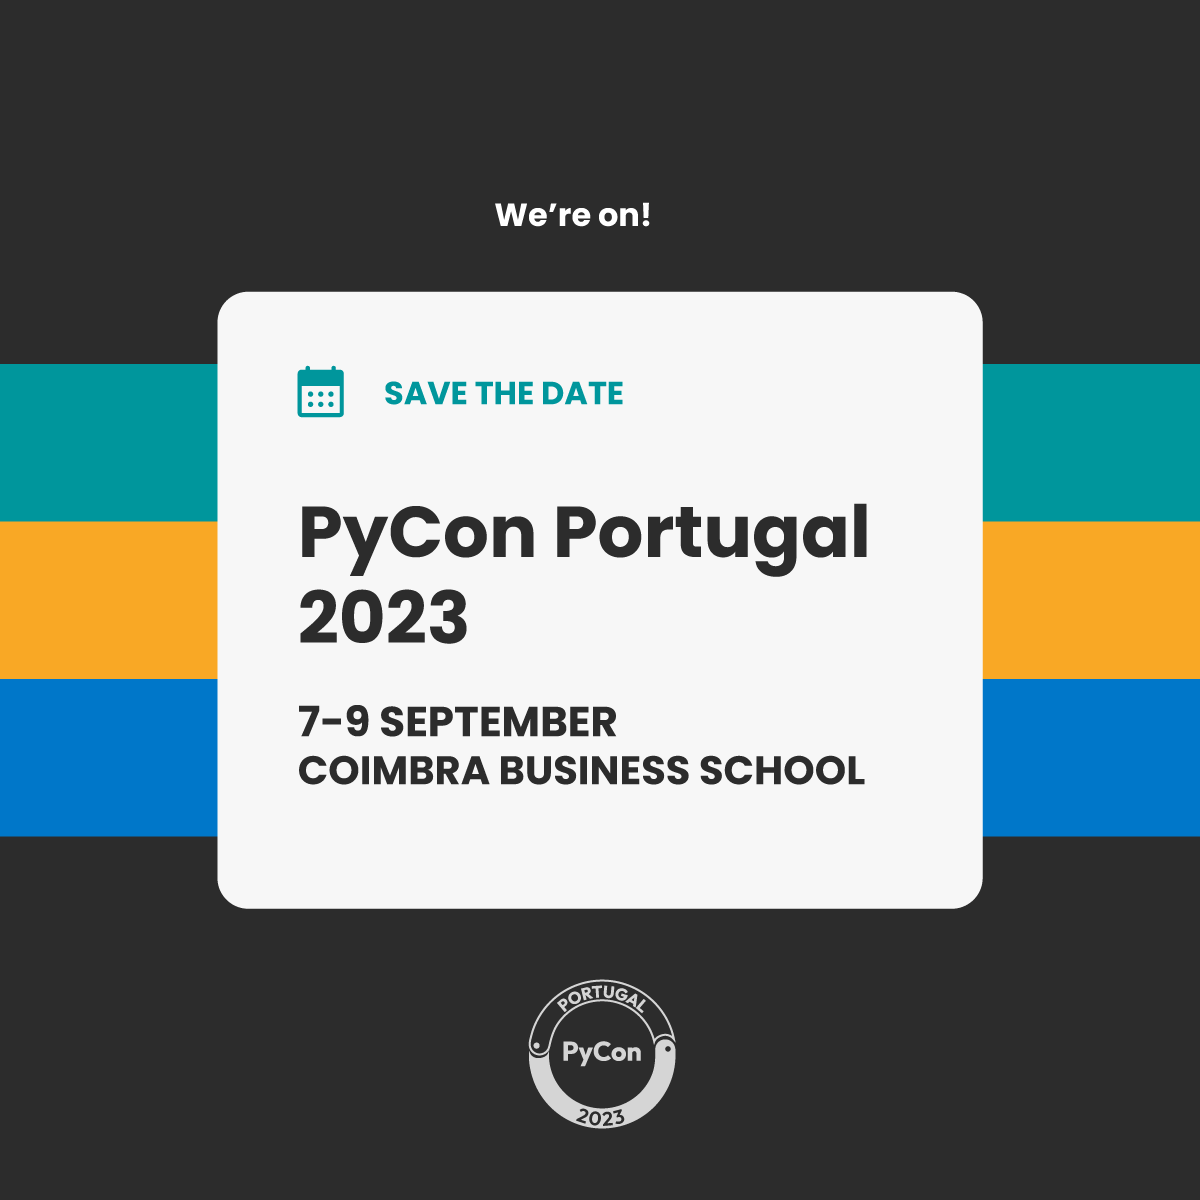 We’re on! Save the Date: PyCon Portugal 2023 7-9 September, Coimbra Business School